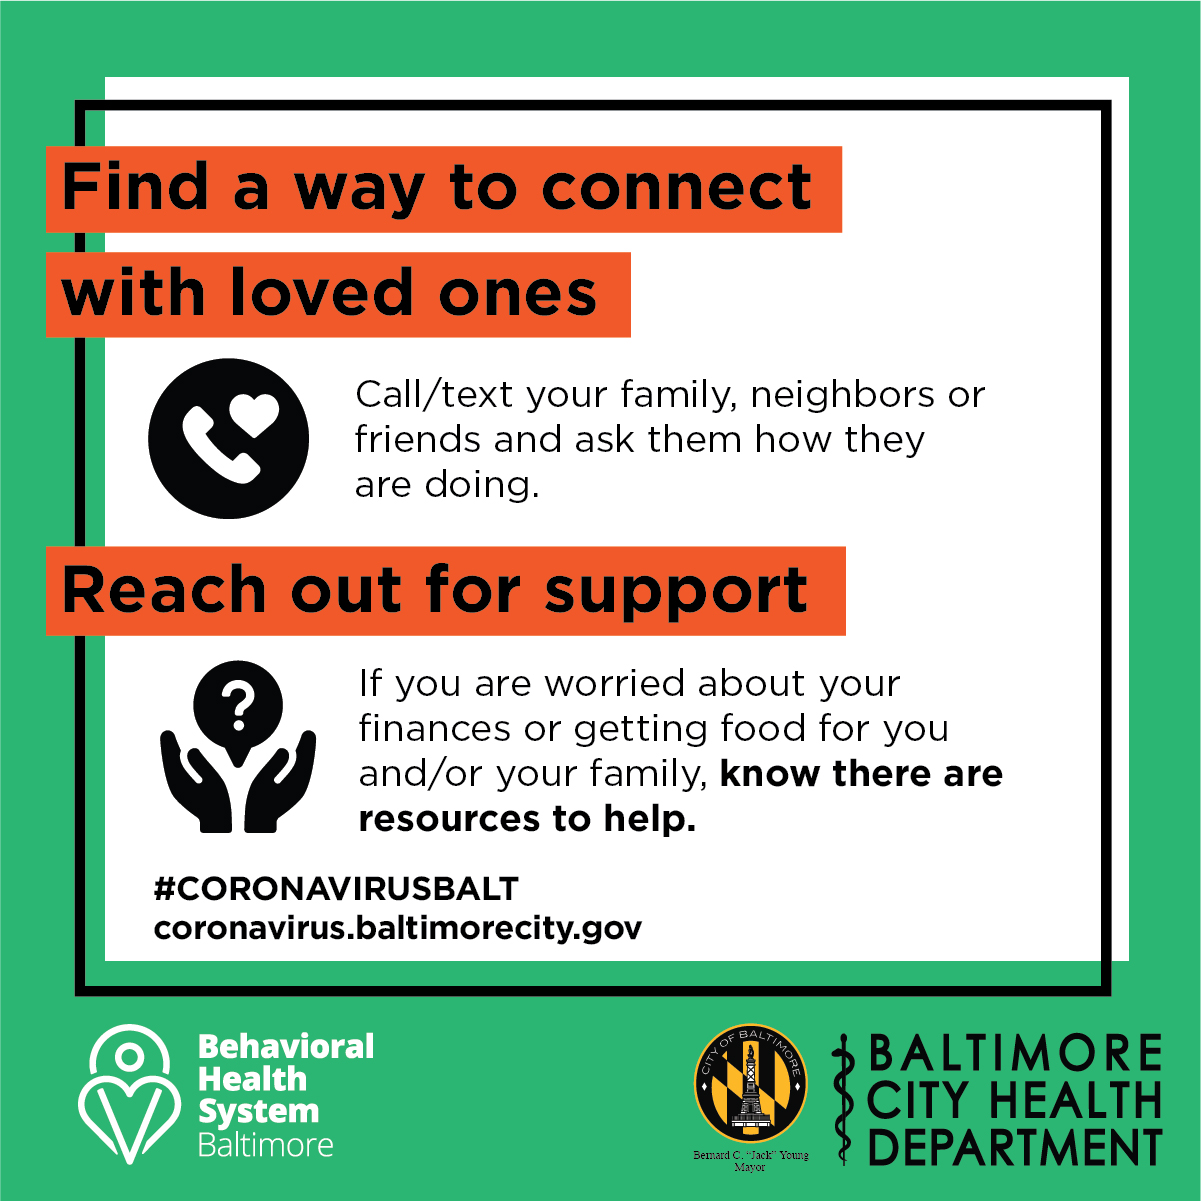 Check-in with your loved ones, reach out for support